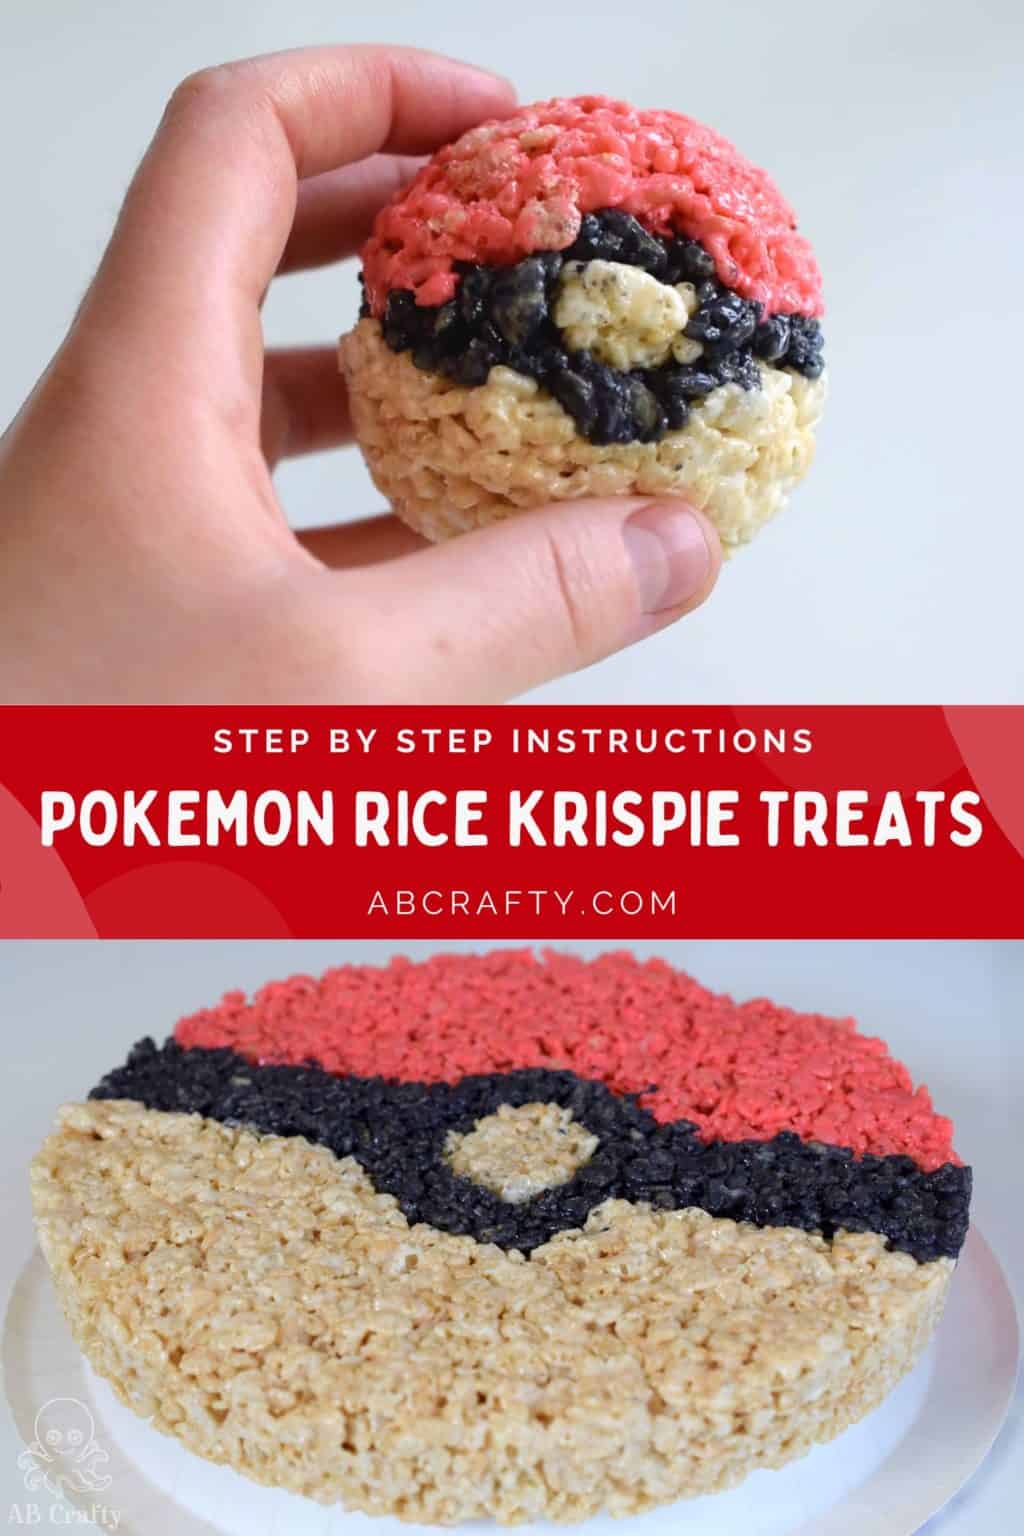 top image is holding the 3d edible pokeball and the bottom showing the flat pokeball rice krispie treat, with the title "step by step instructions - pokemon rice krispie treats, abcrafty.com"